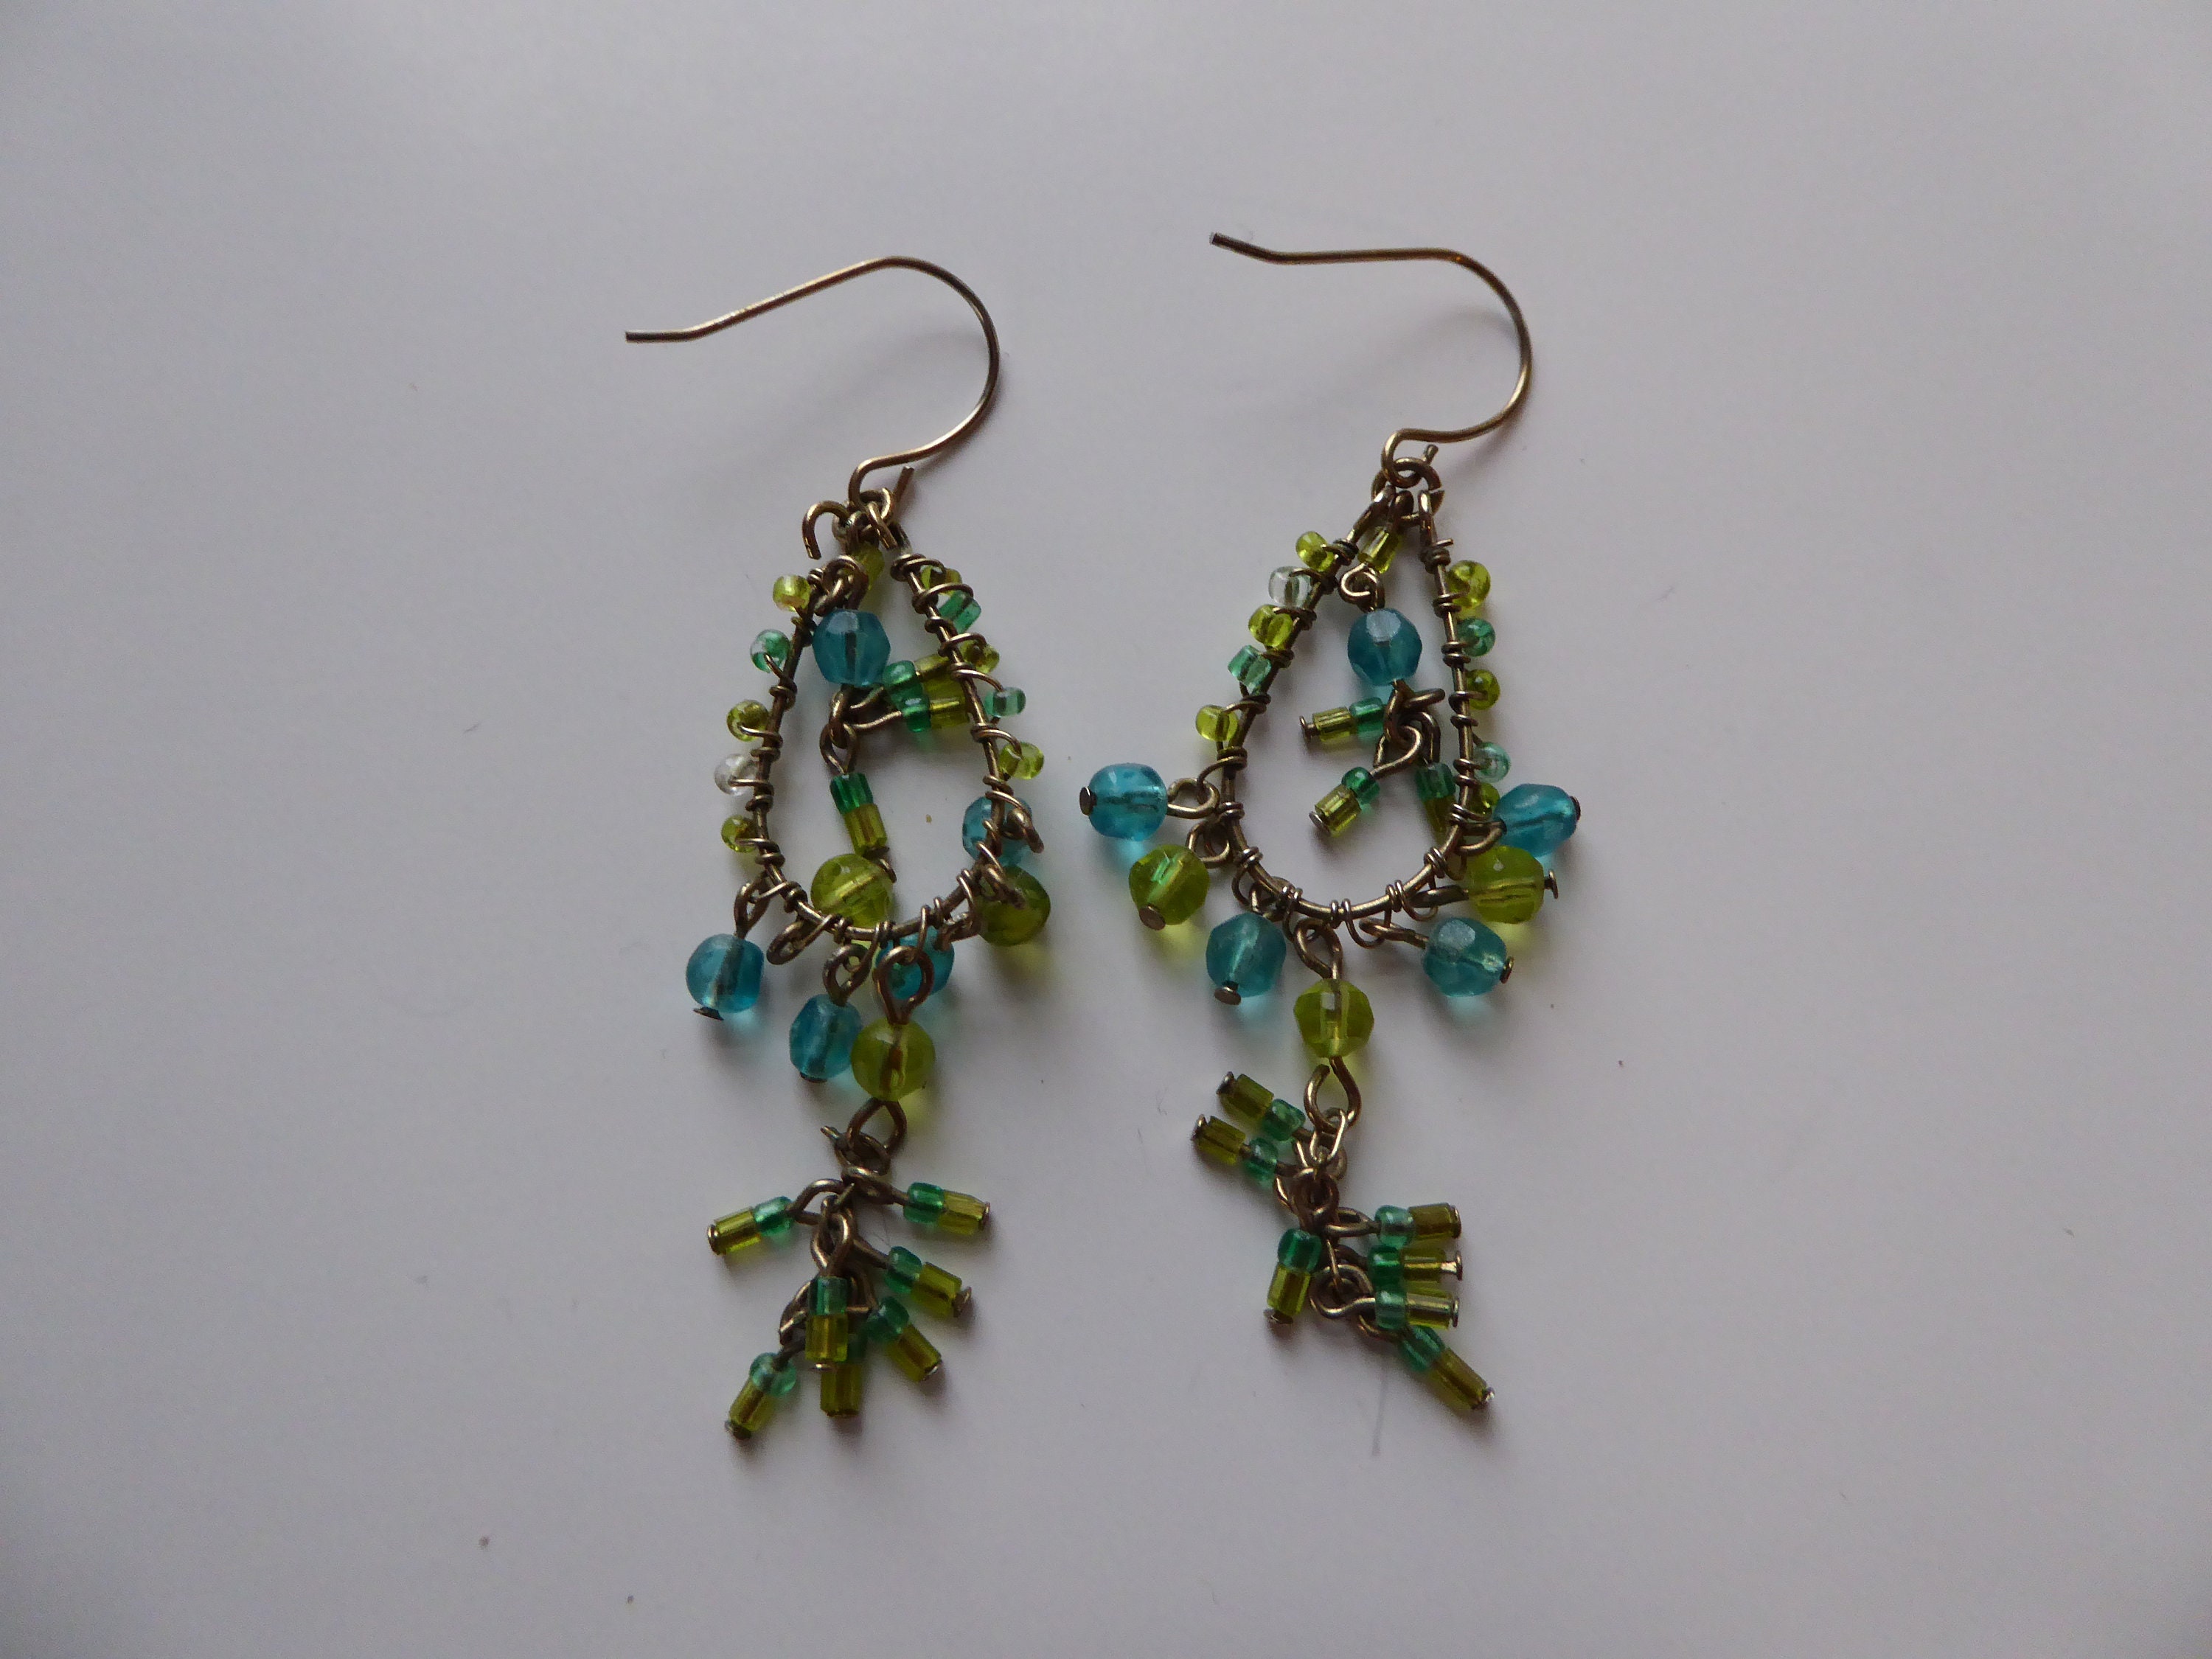 Vintage Green and Blue Dangle Earrings Vintage Jewellery Gift for Her. Gold Tone Ear Wire Beaded Earrings Costume Jewelry